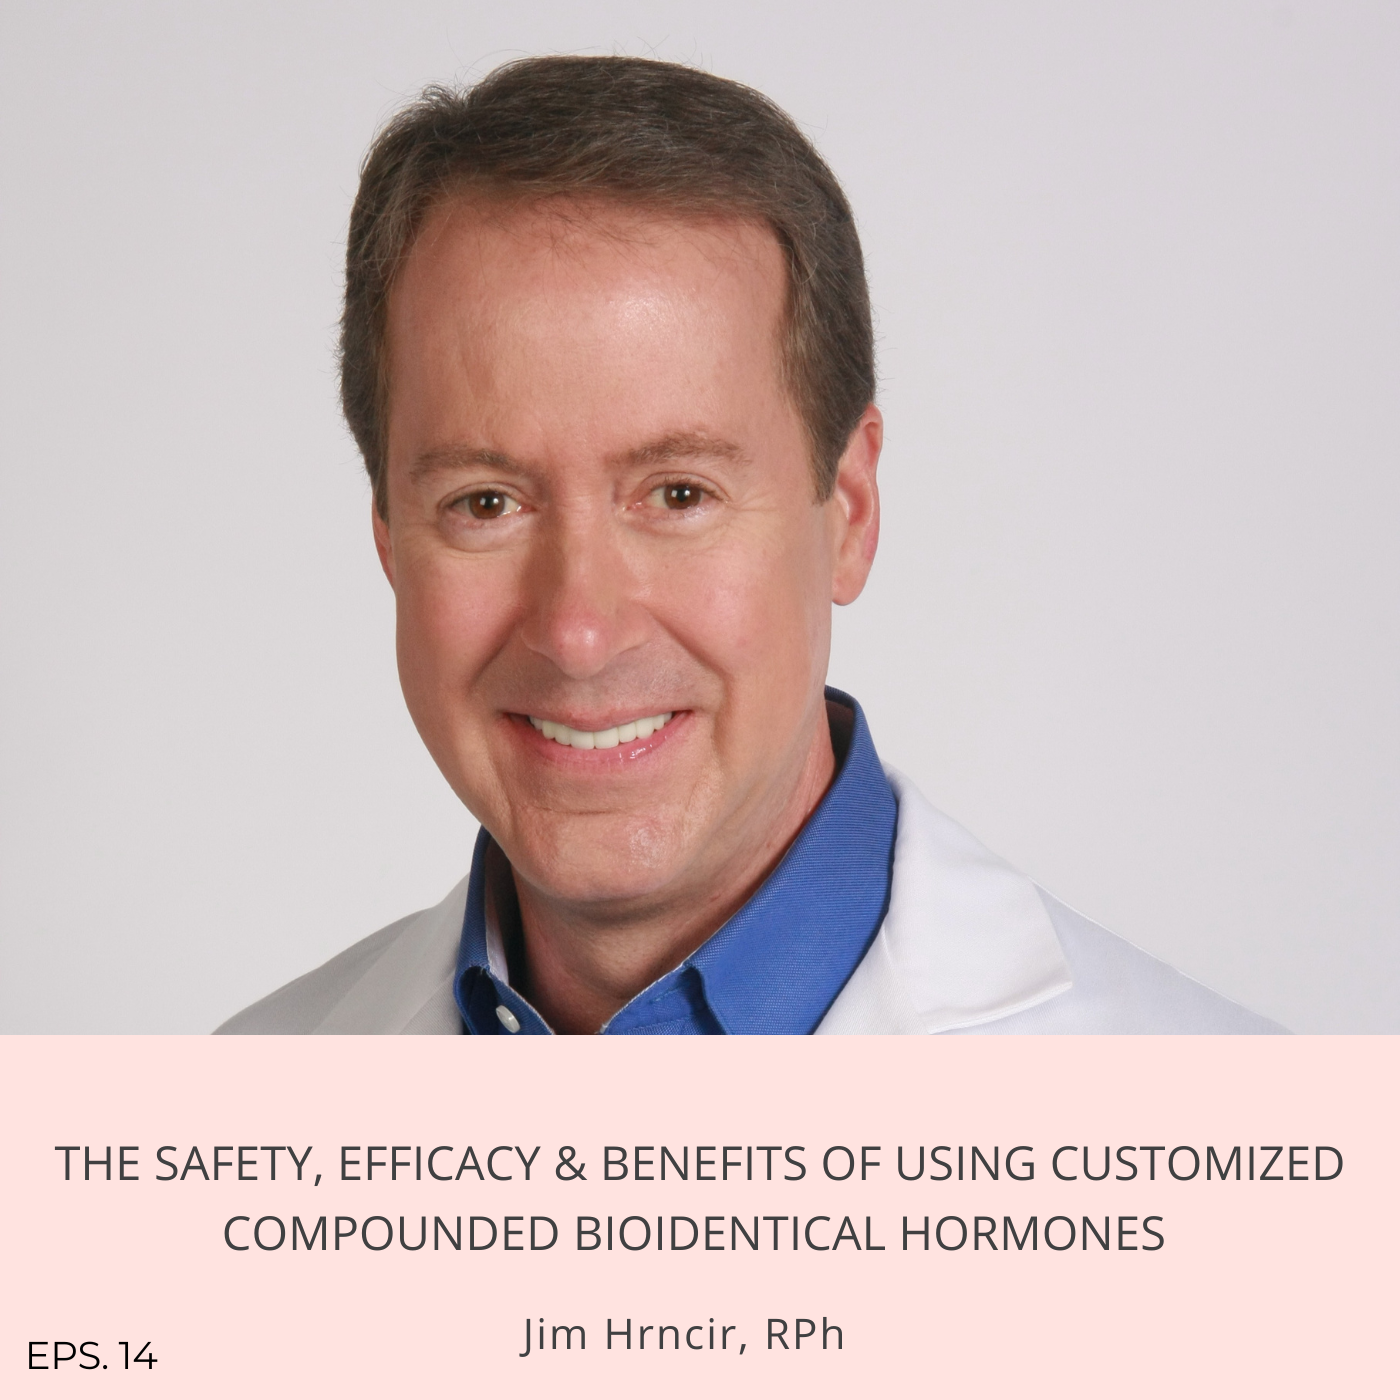 Episode 14: The safety, efficacy & benefits of using customized compounded bioidentical hormones with Jim Hrncir, RPh